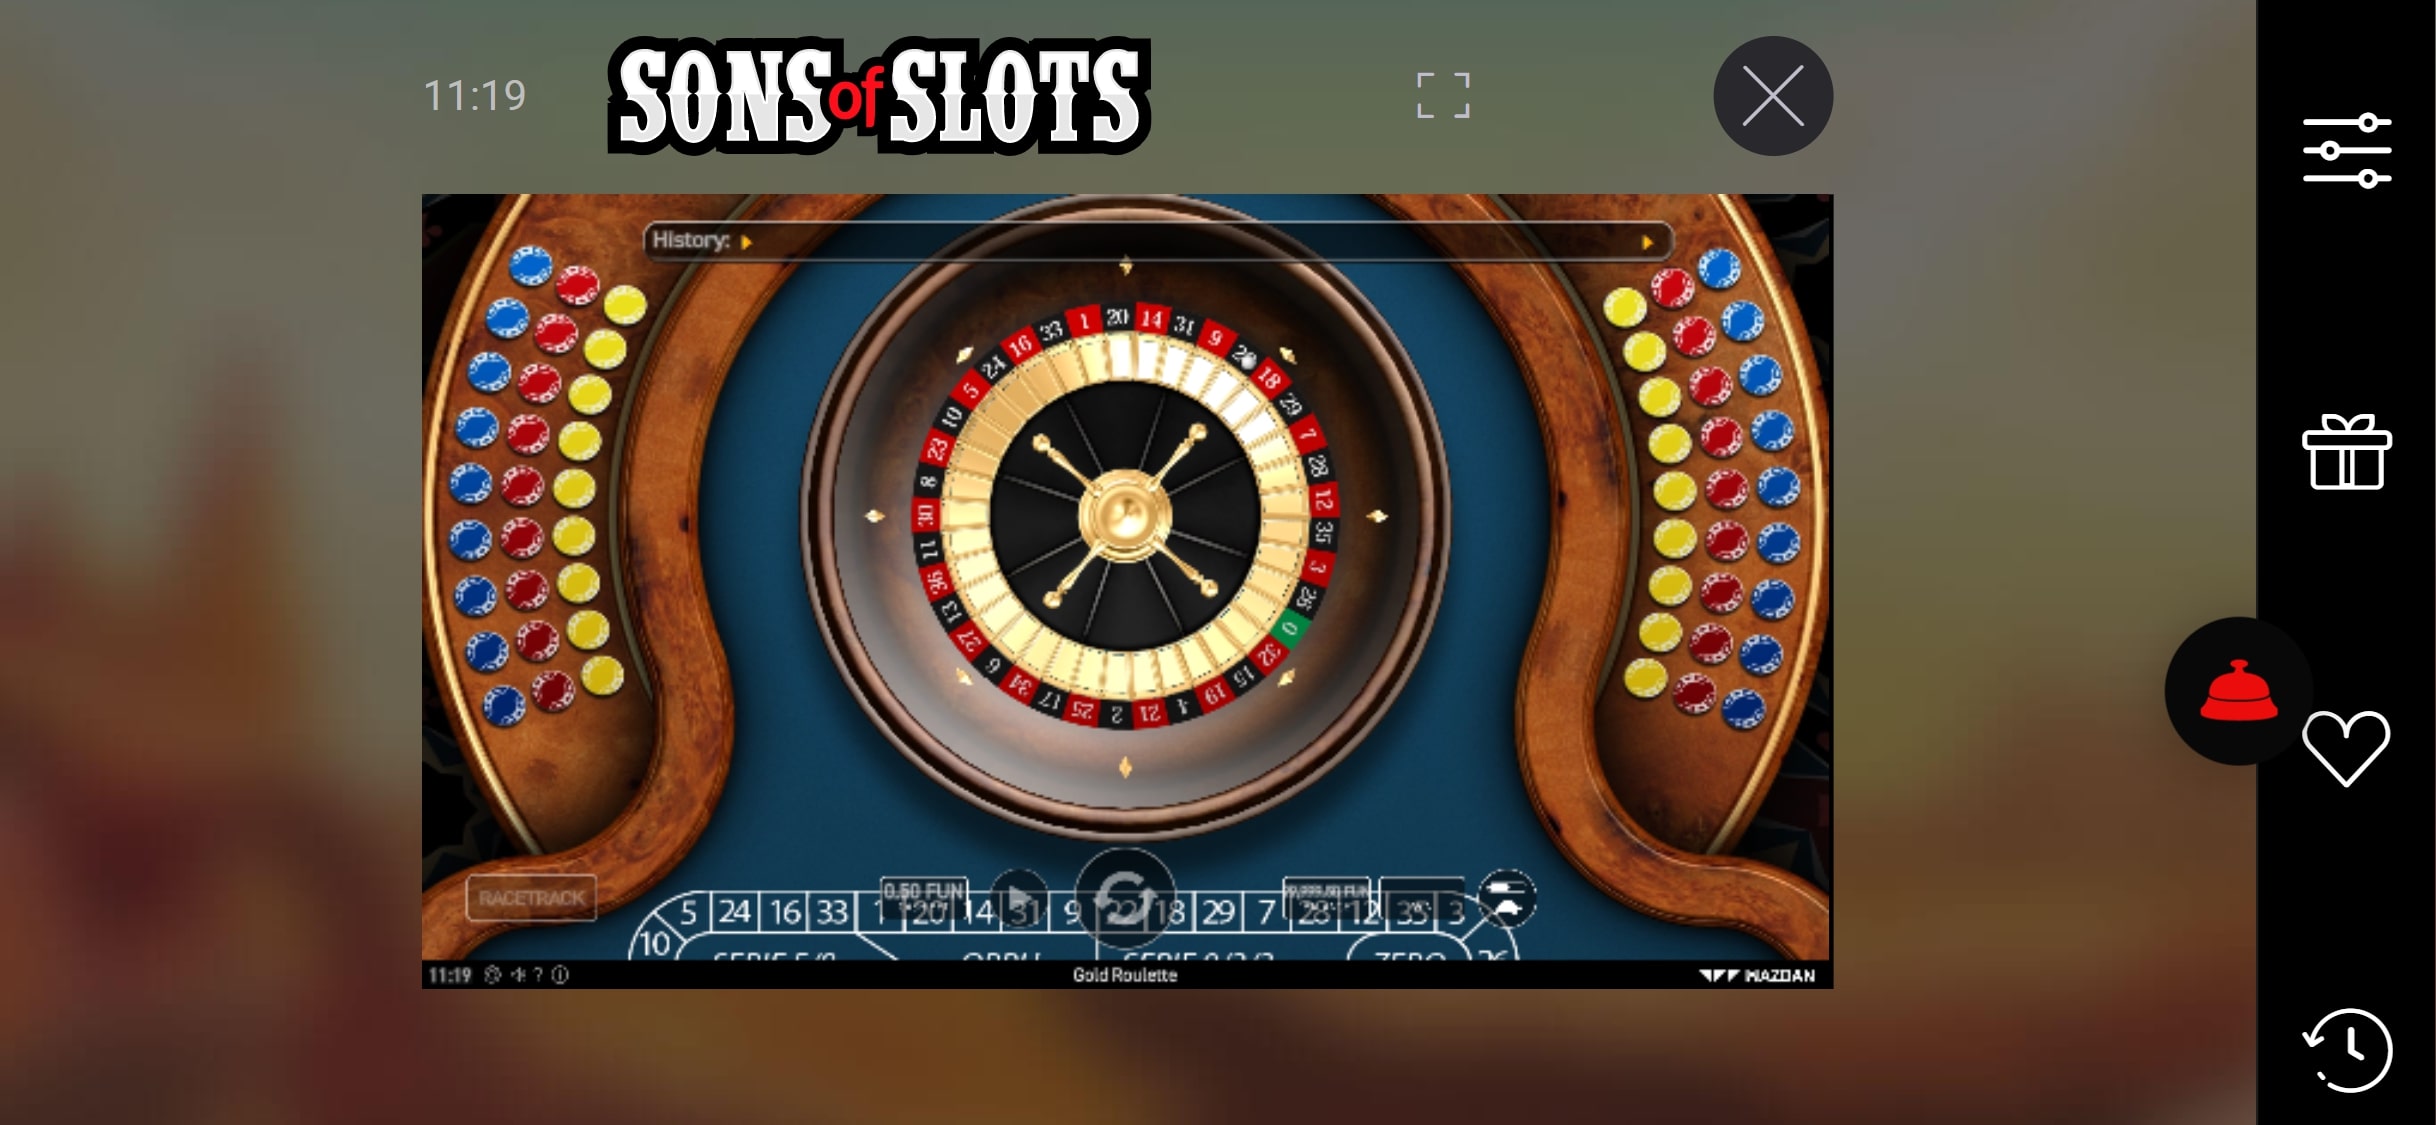 Sons of Slots Mobile Casino Games Review